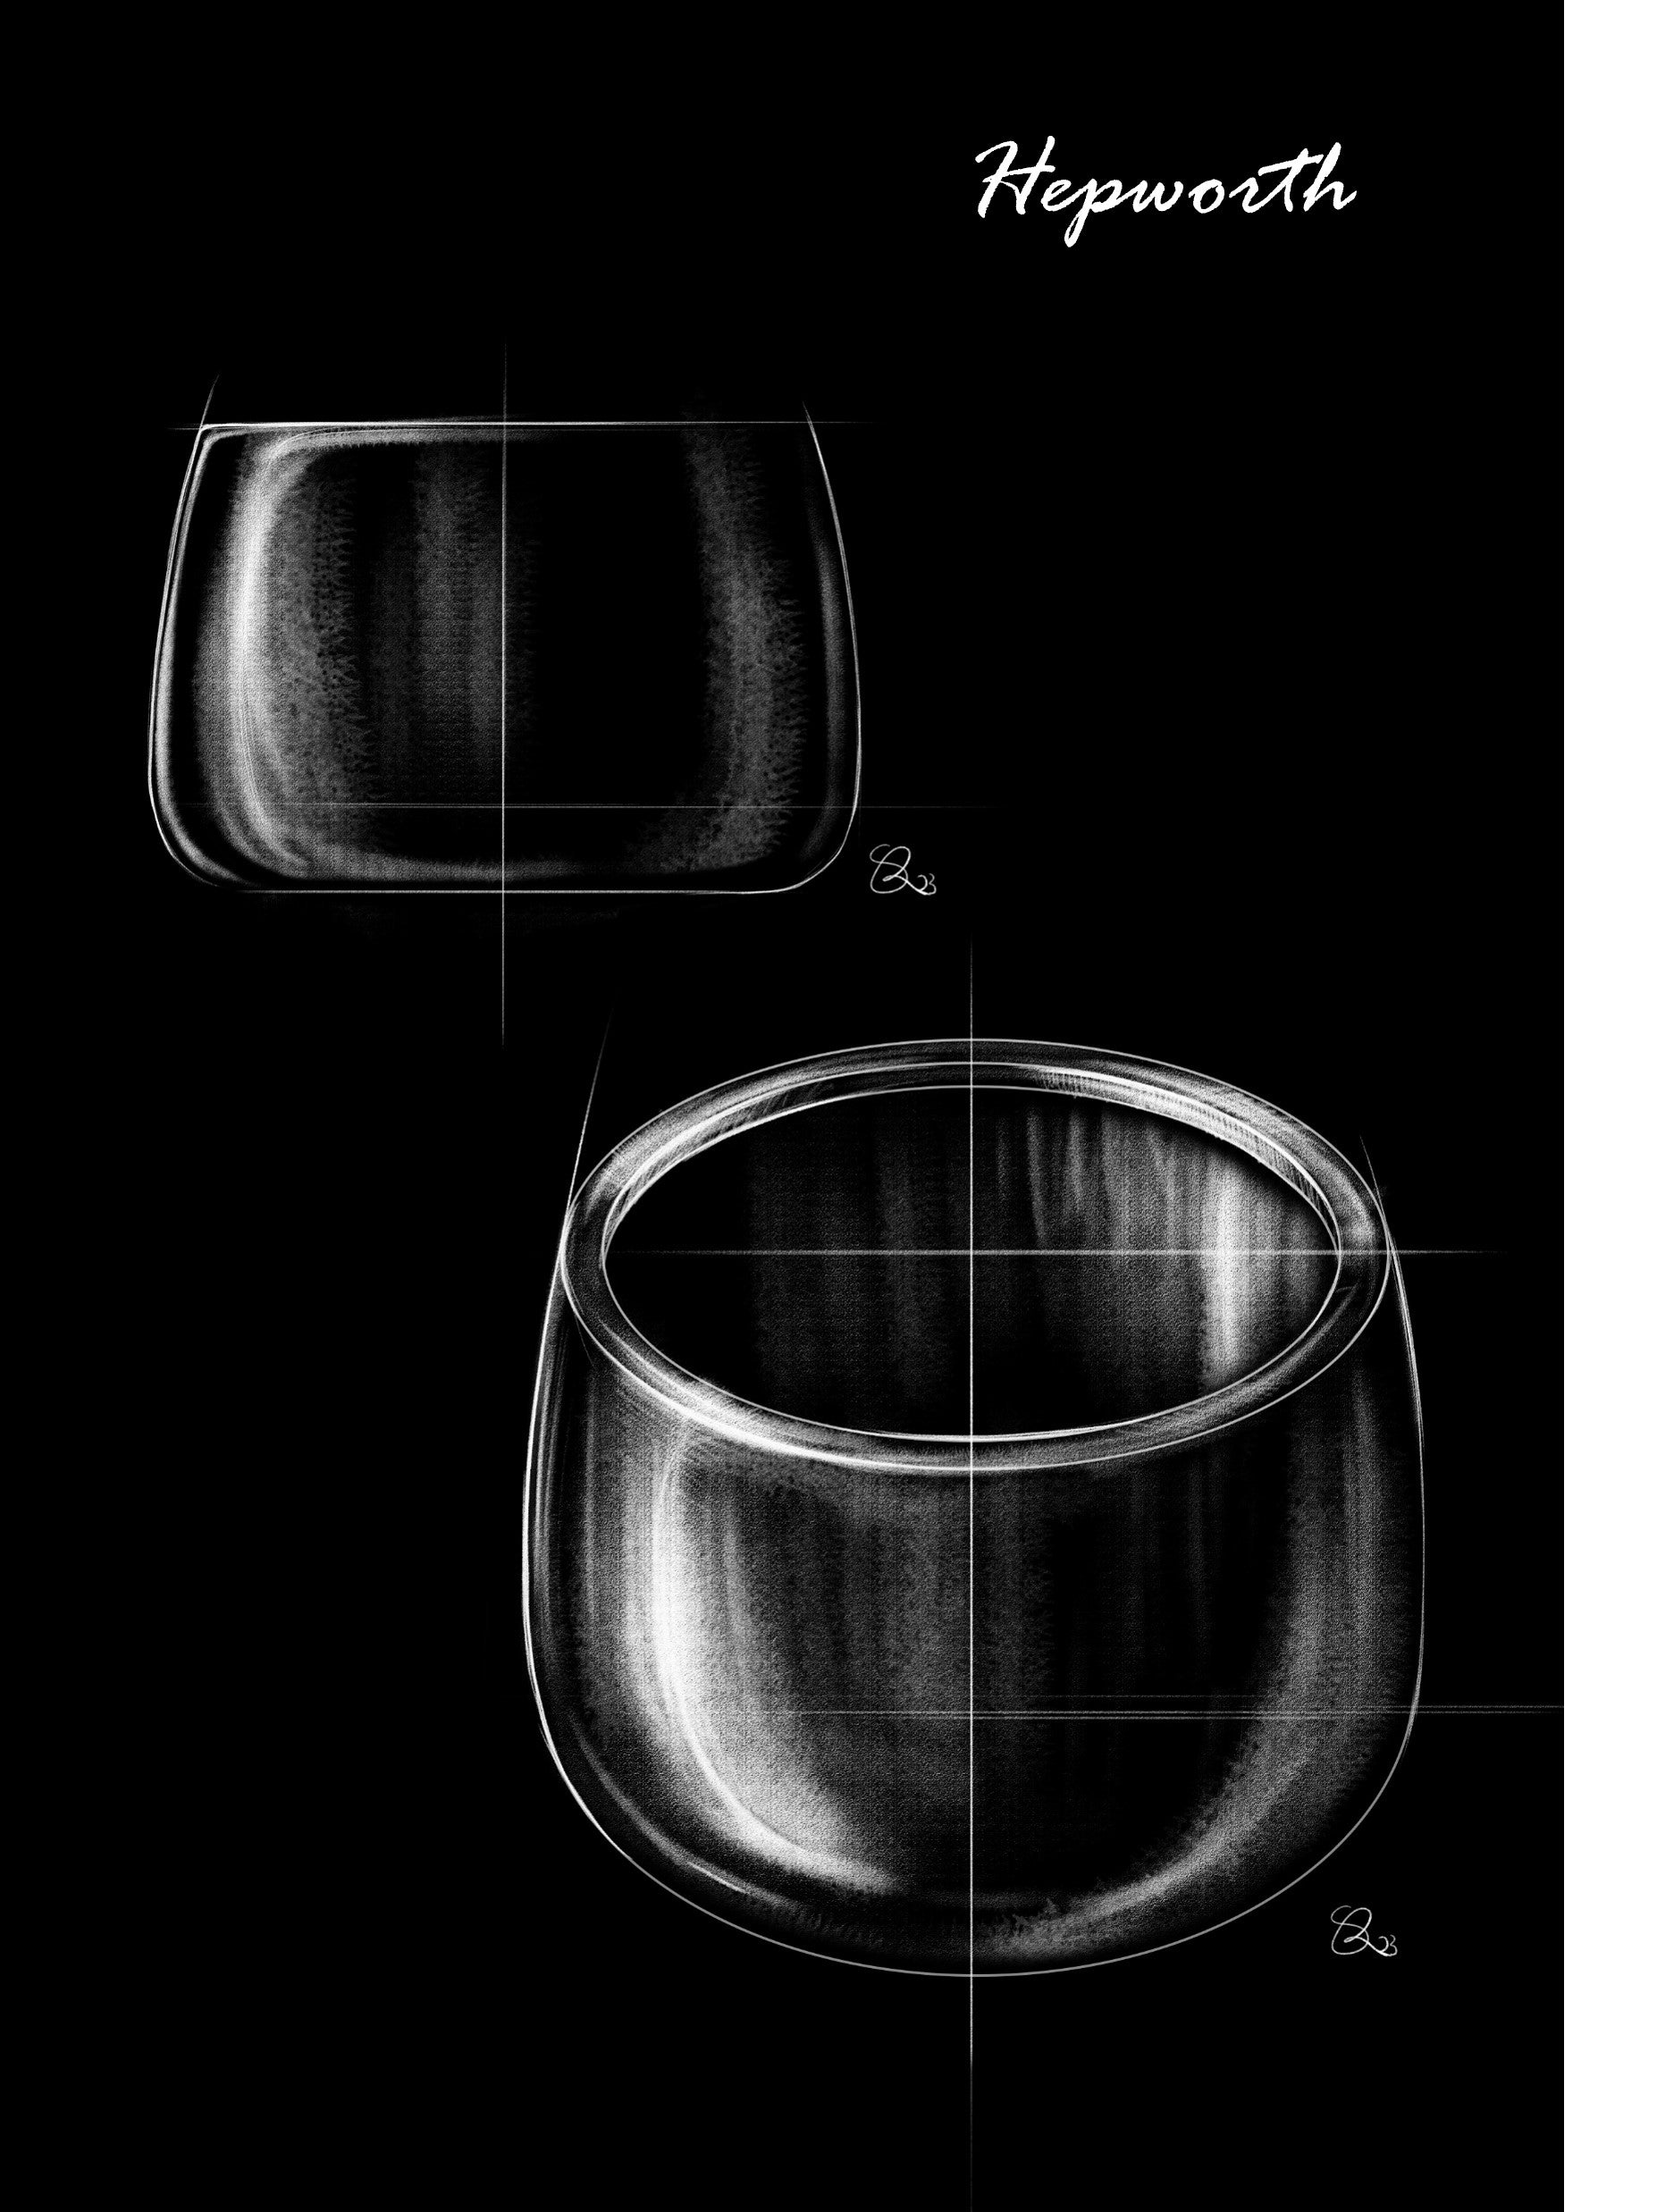 Black and white sketch of a Hepworth plant pot.